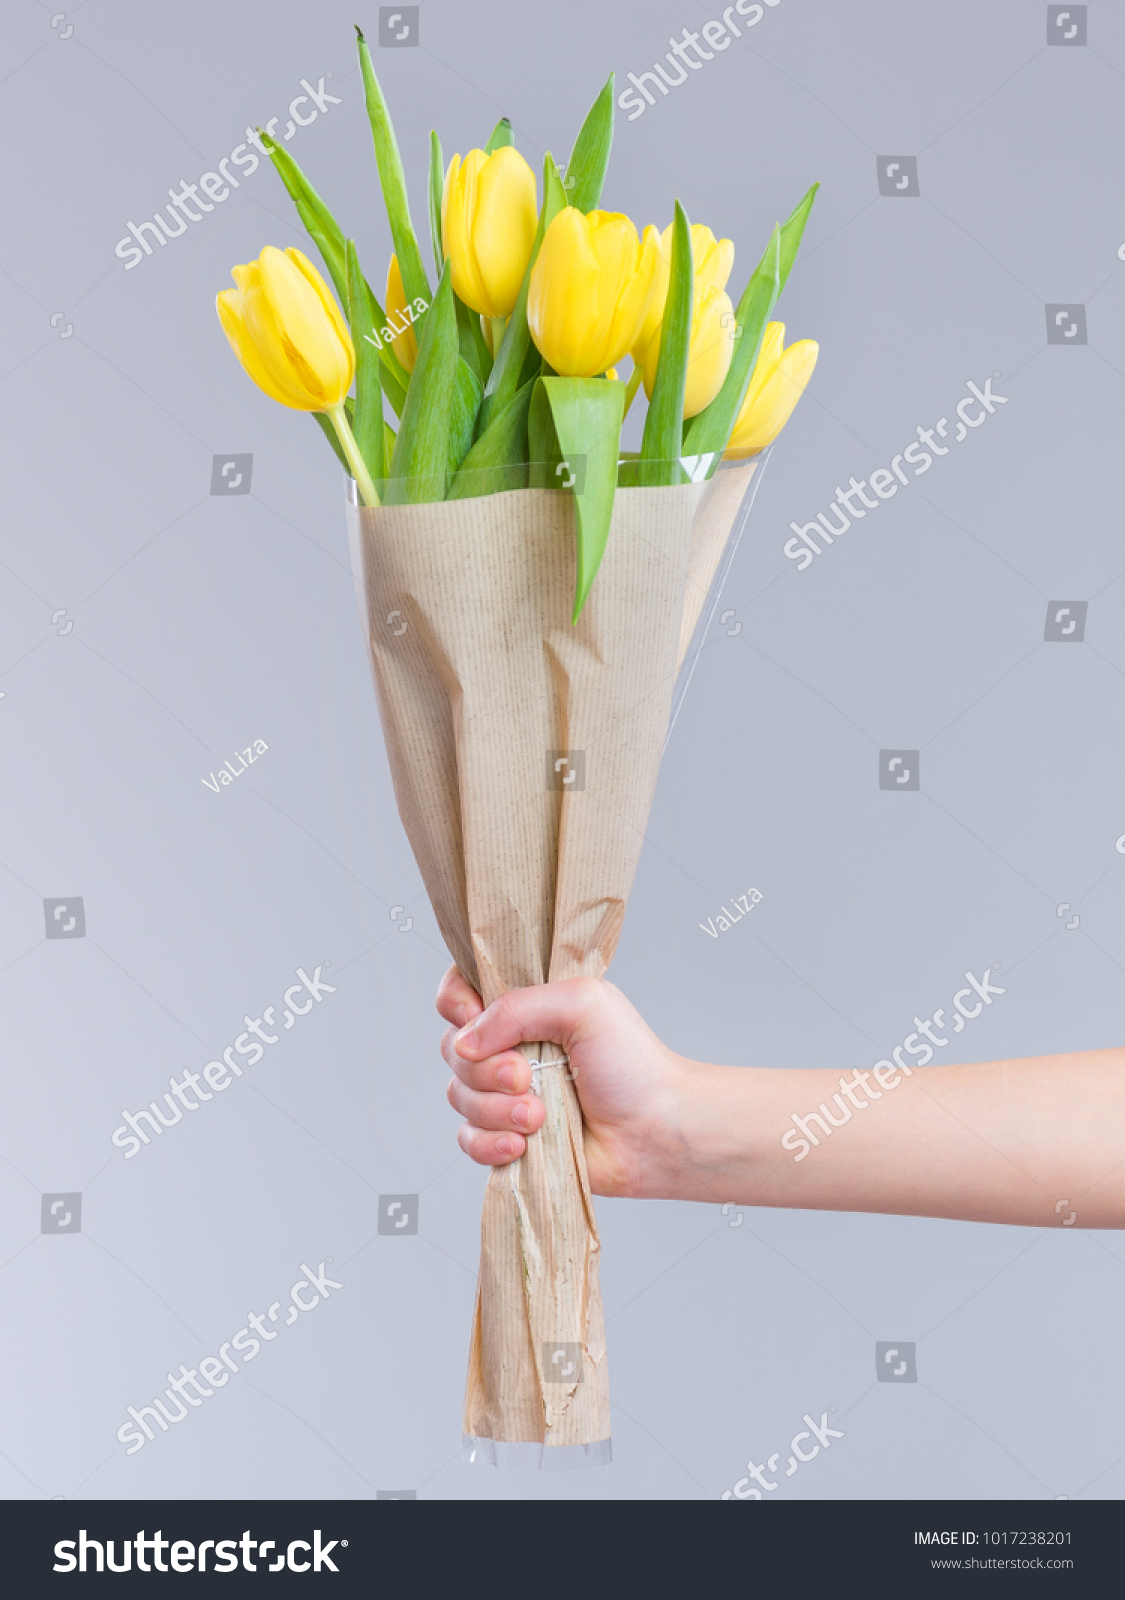 American teen girl with bouquet